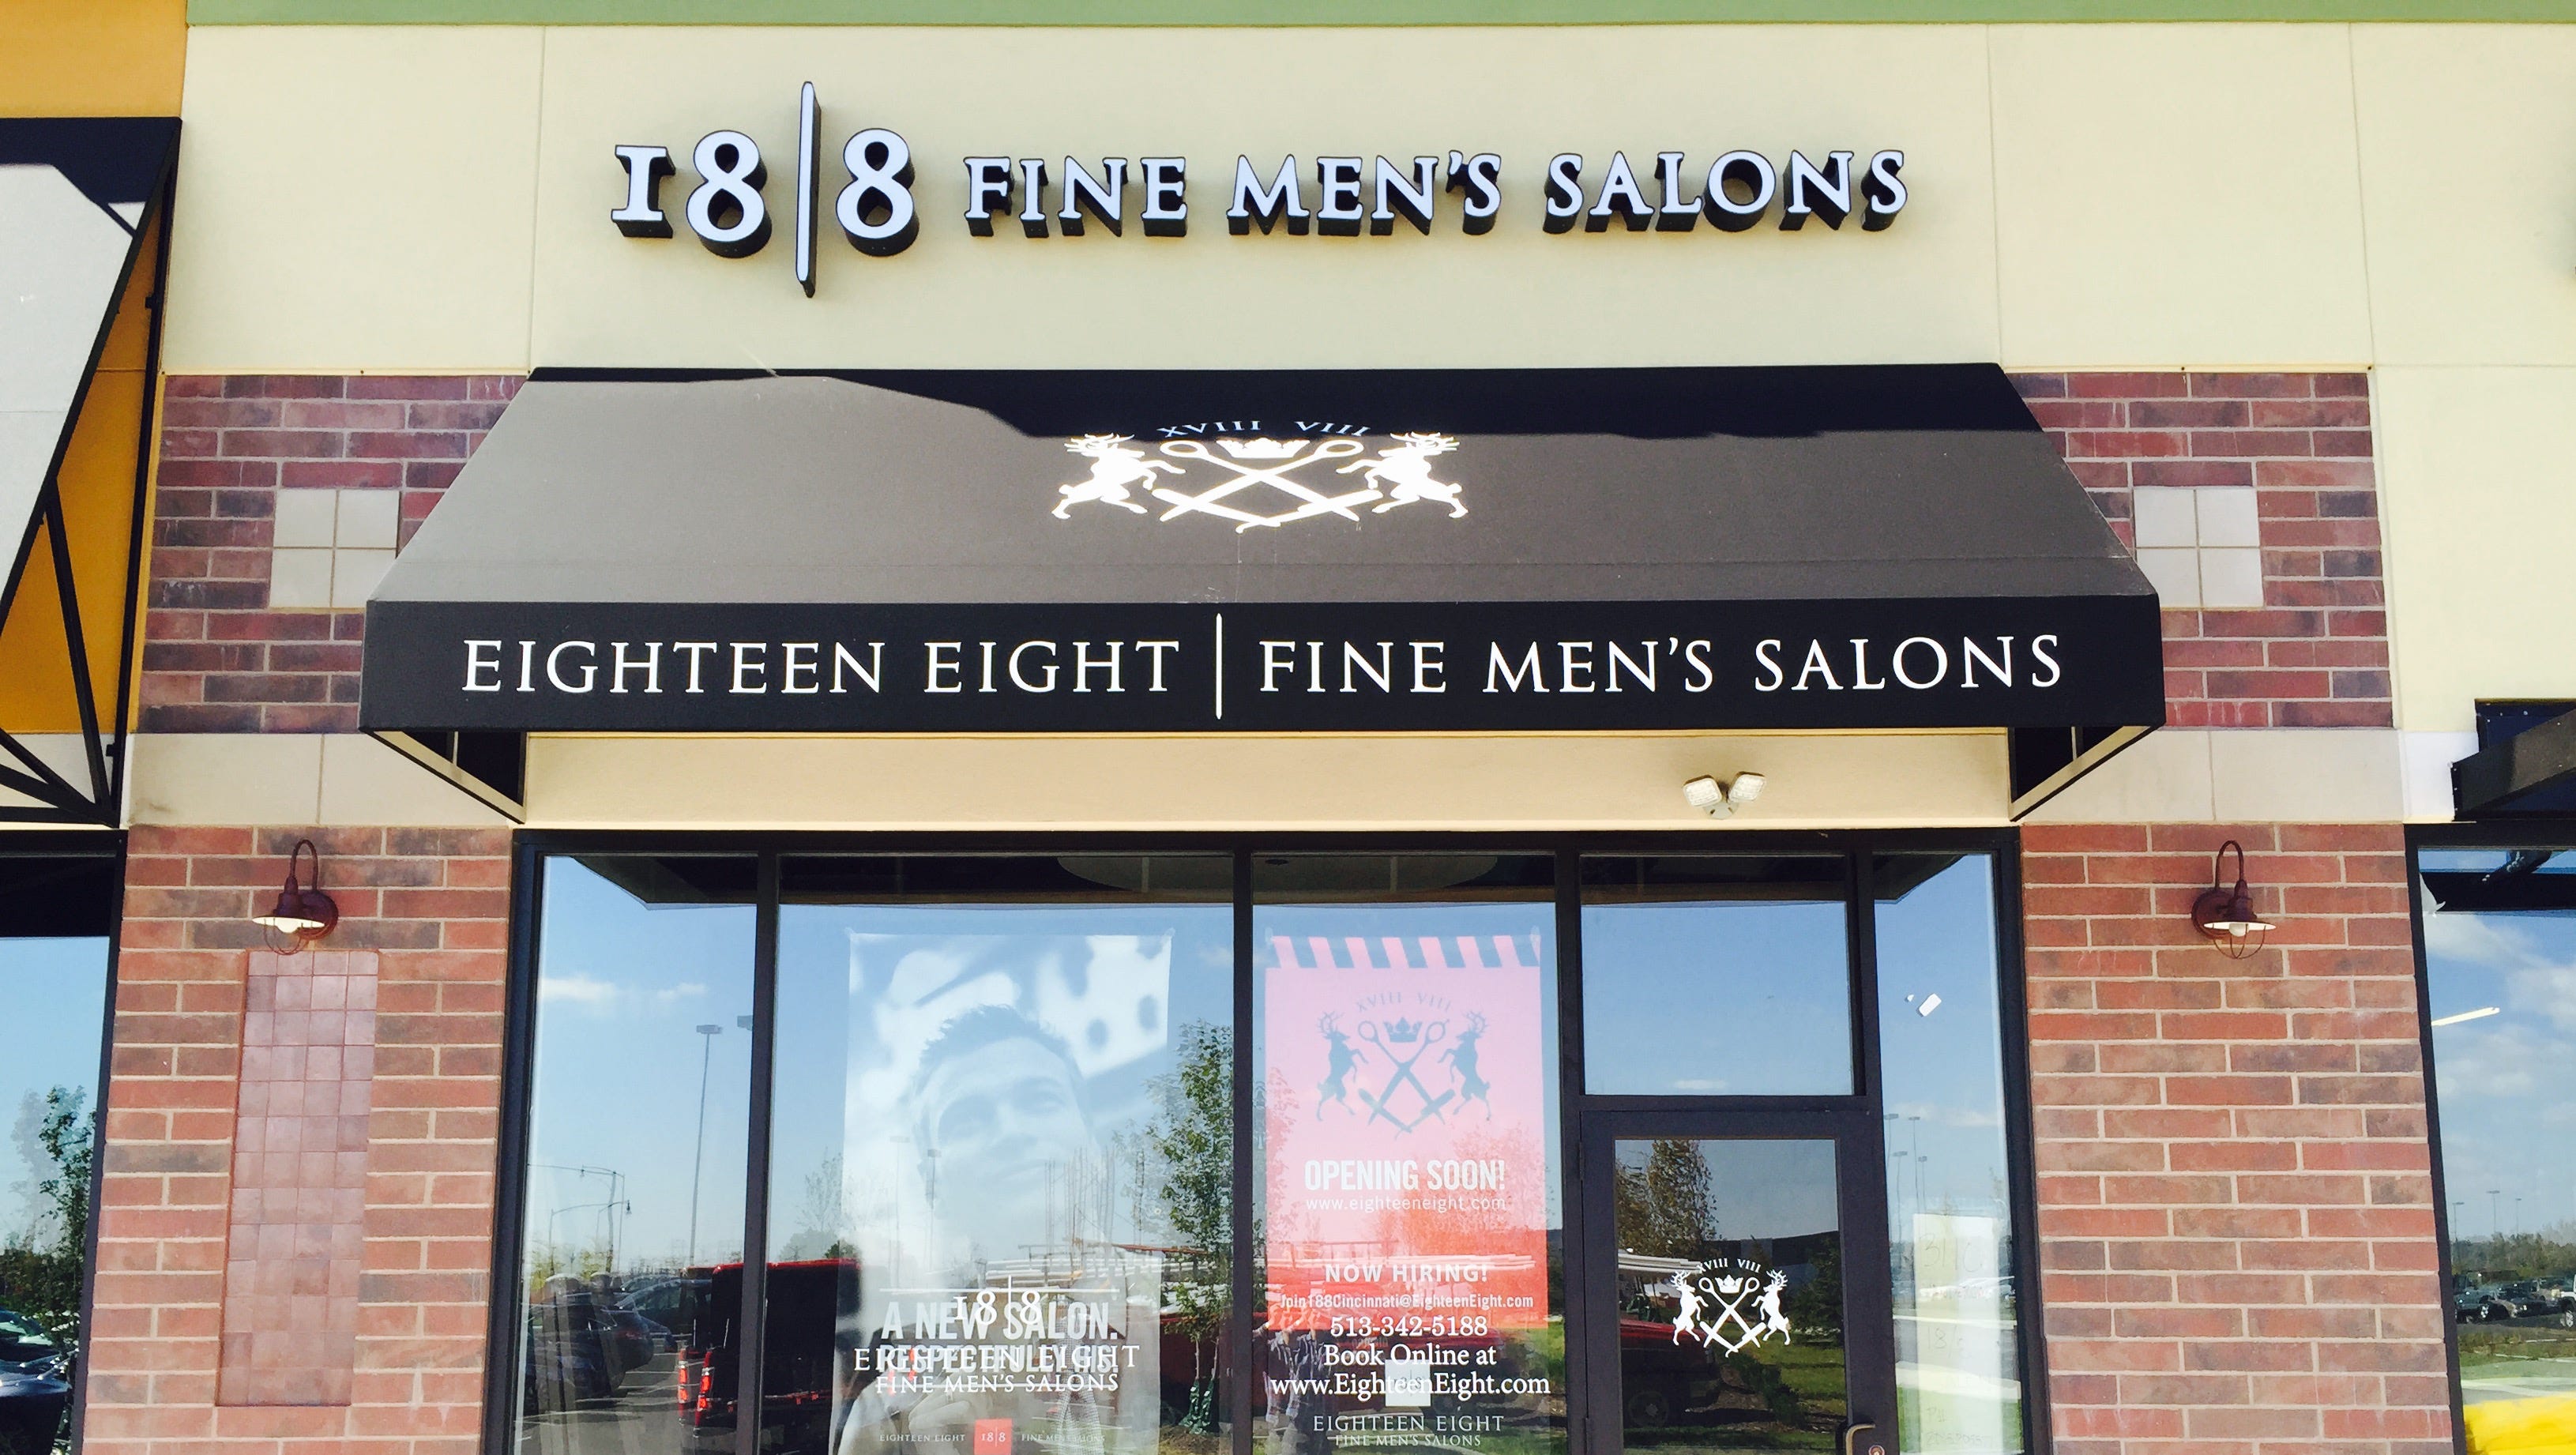 New in Retail: High-end haircuts and beer